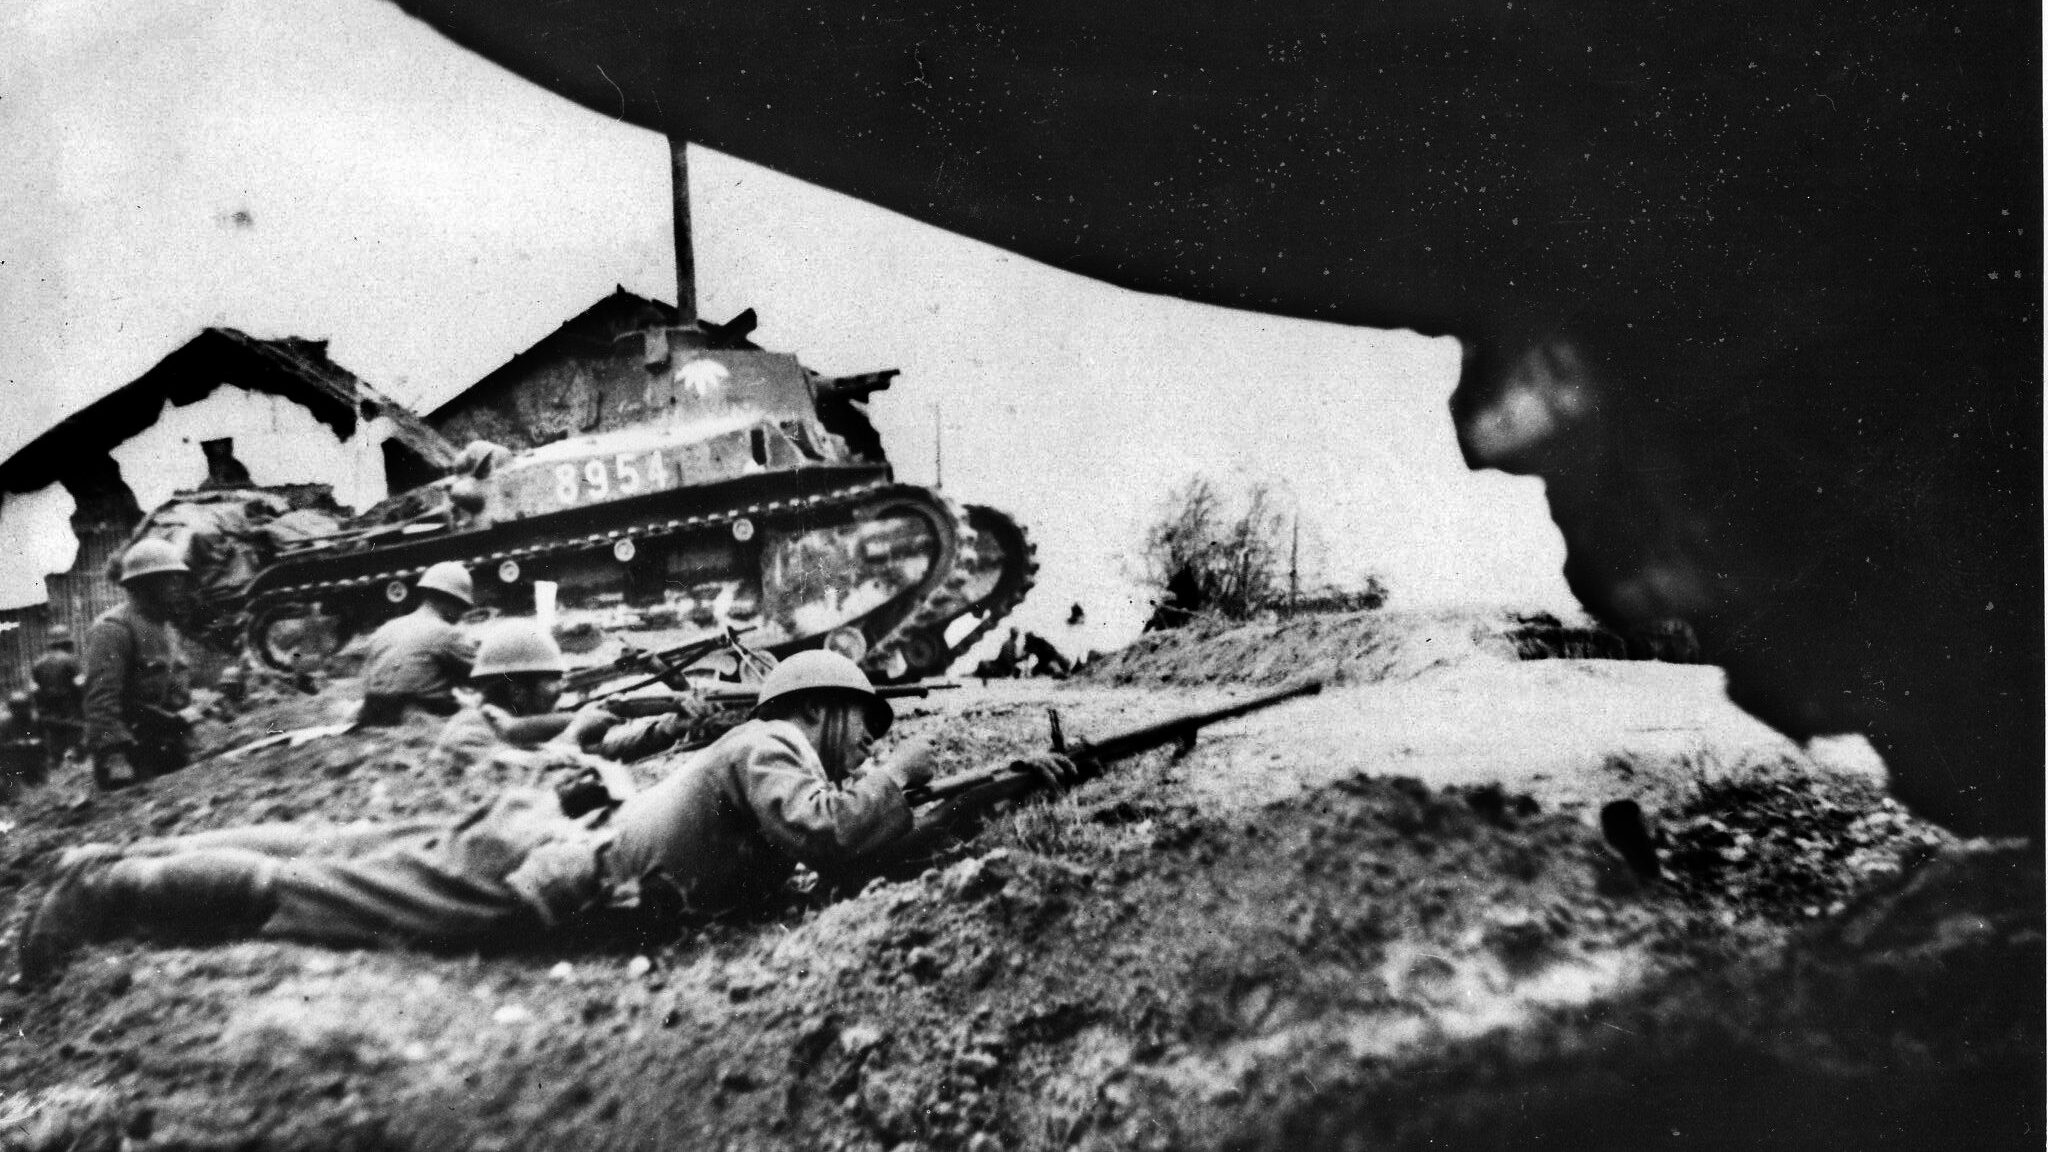 On January 5, 1939, a Japanese Type 92 combat car supports attacking infantry near the town of Nanchang, a key location in central China. 